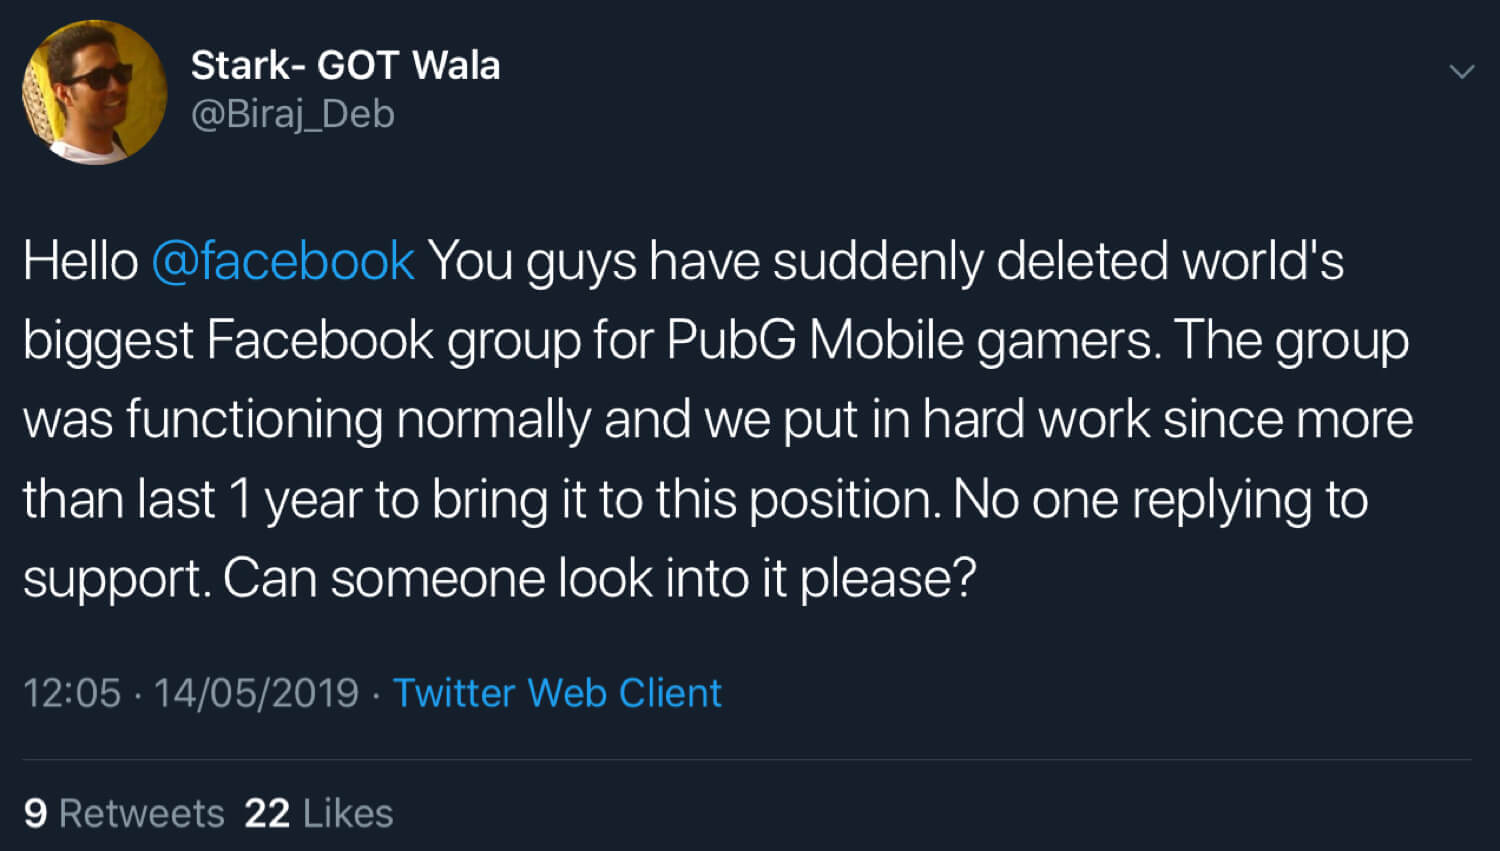 Stark-GOT Wala announcing that Facebook has deleted the world’s biggest Facebook group for PubG mobile gamers.